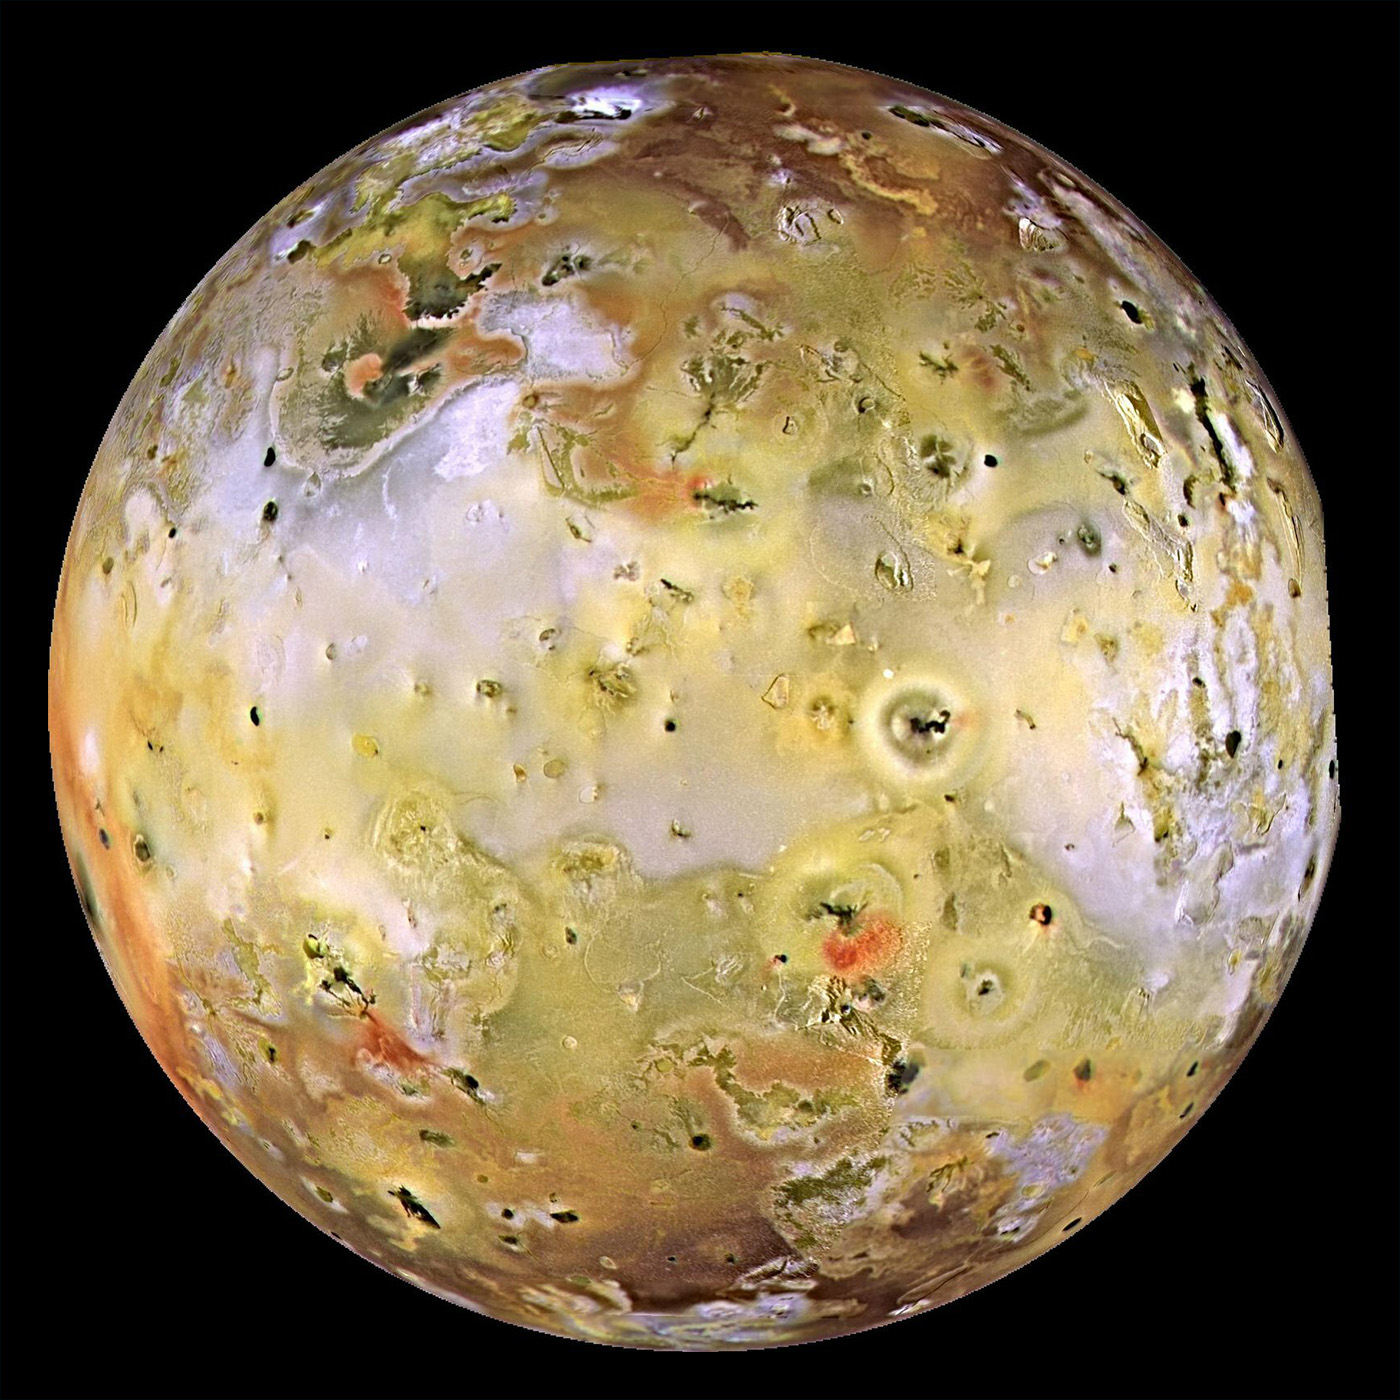 Io and Voyager 2: Lost oceans and found signals